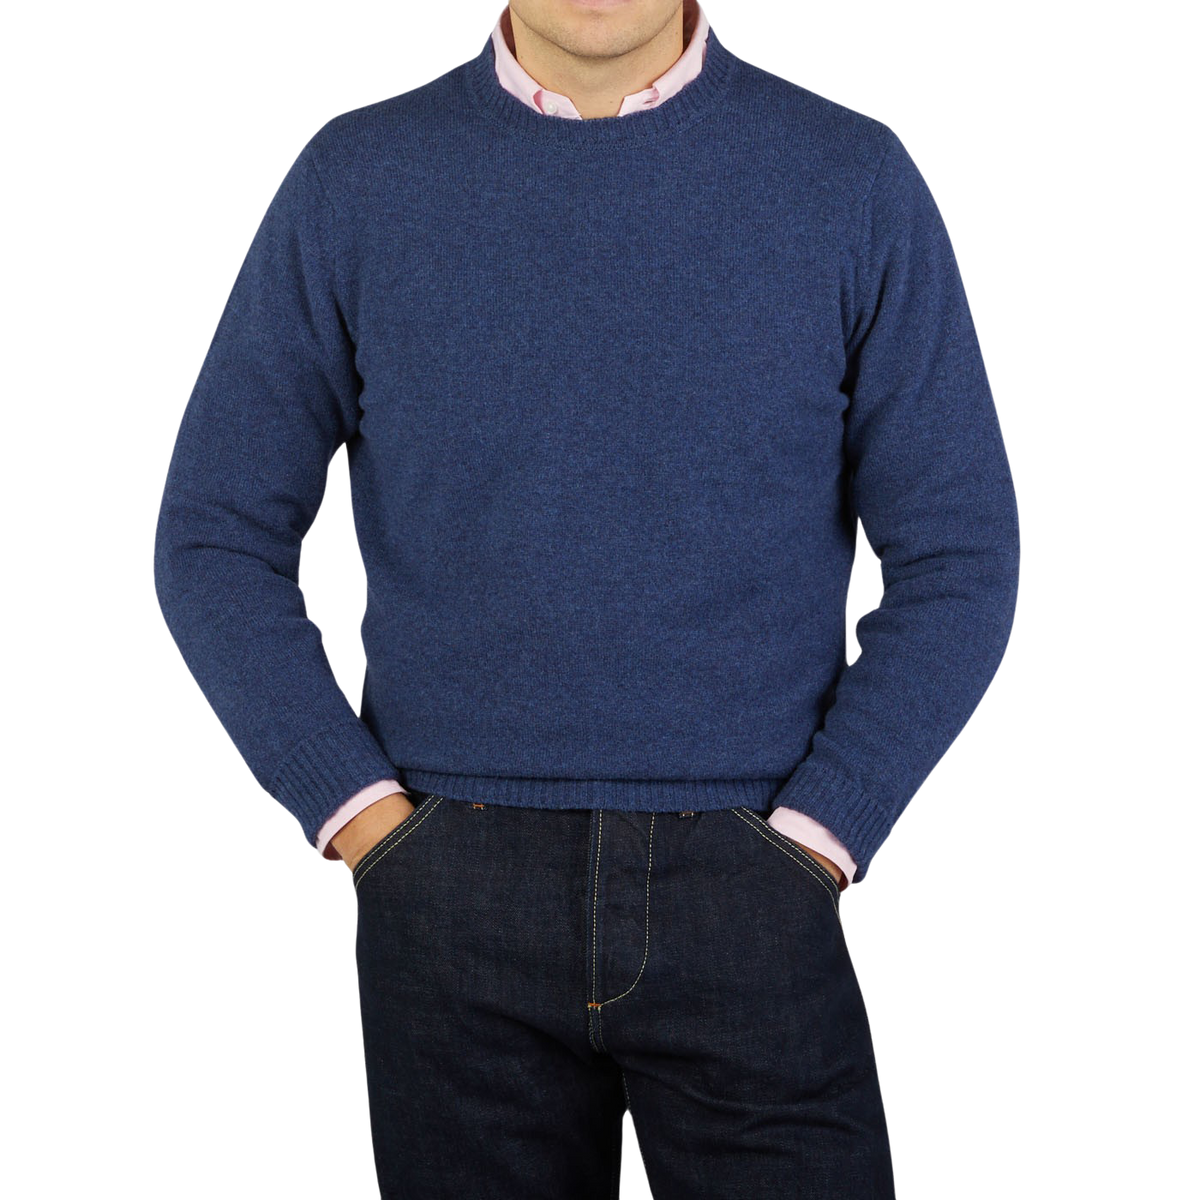 A man wearing a smart casual outfit consisting of a Rhapsody Blue Crew Neck Lambswool Sweater by William Lockie and jeans.